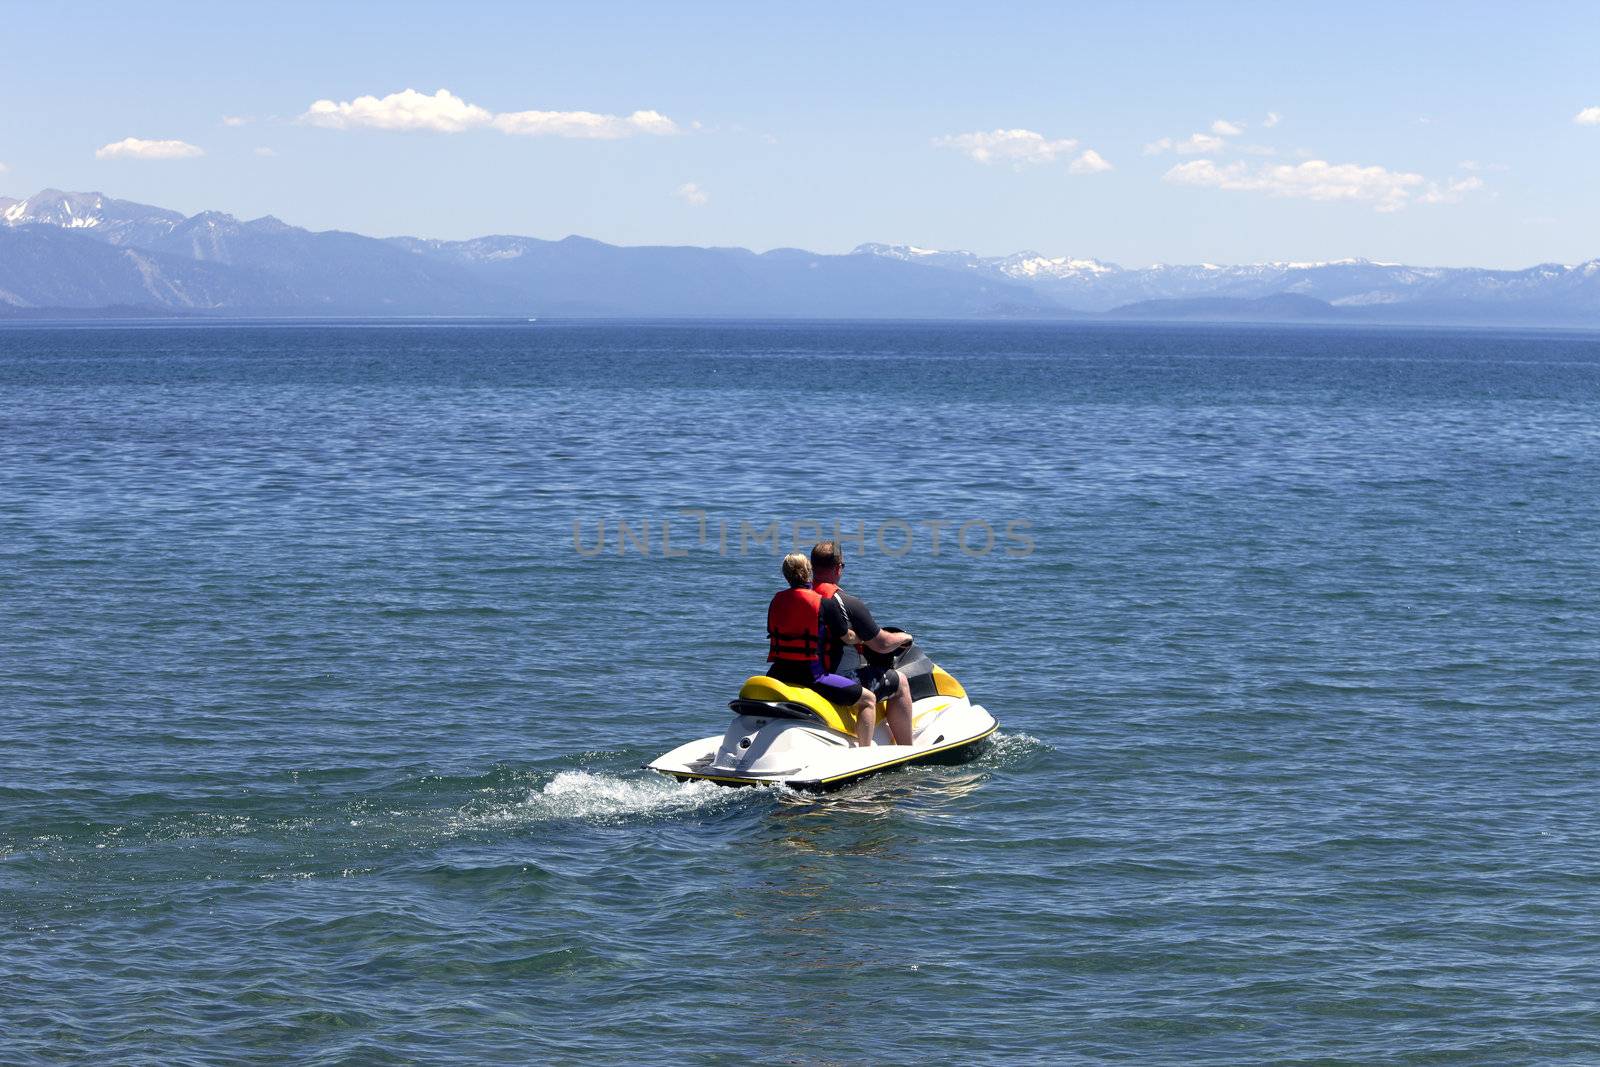 Riding the water scooter on Lake Tahoe, California.